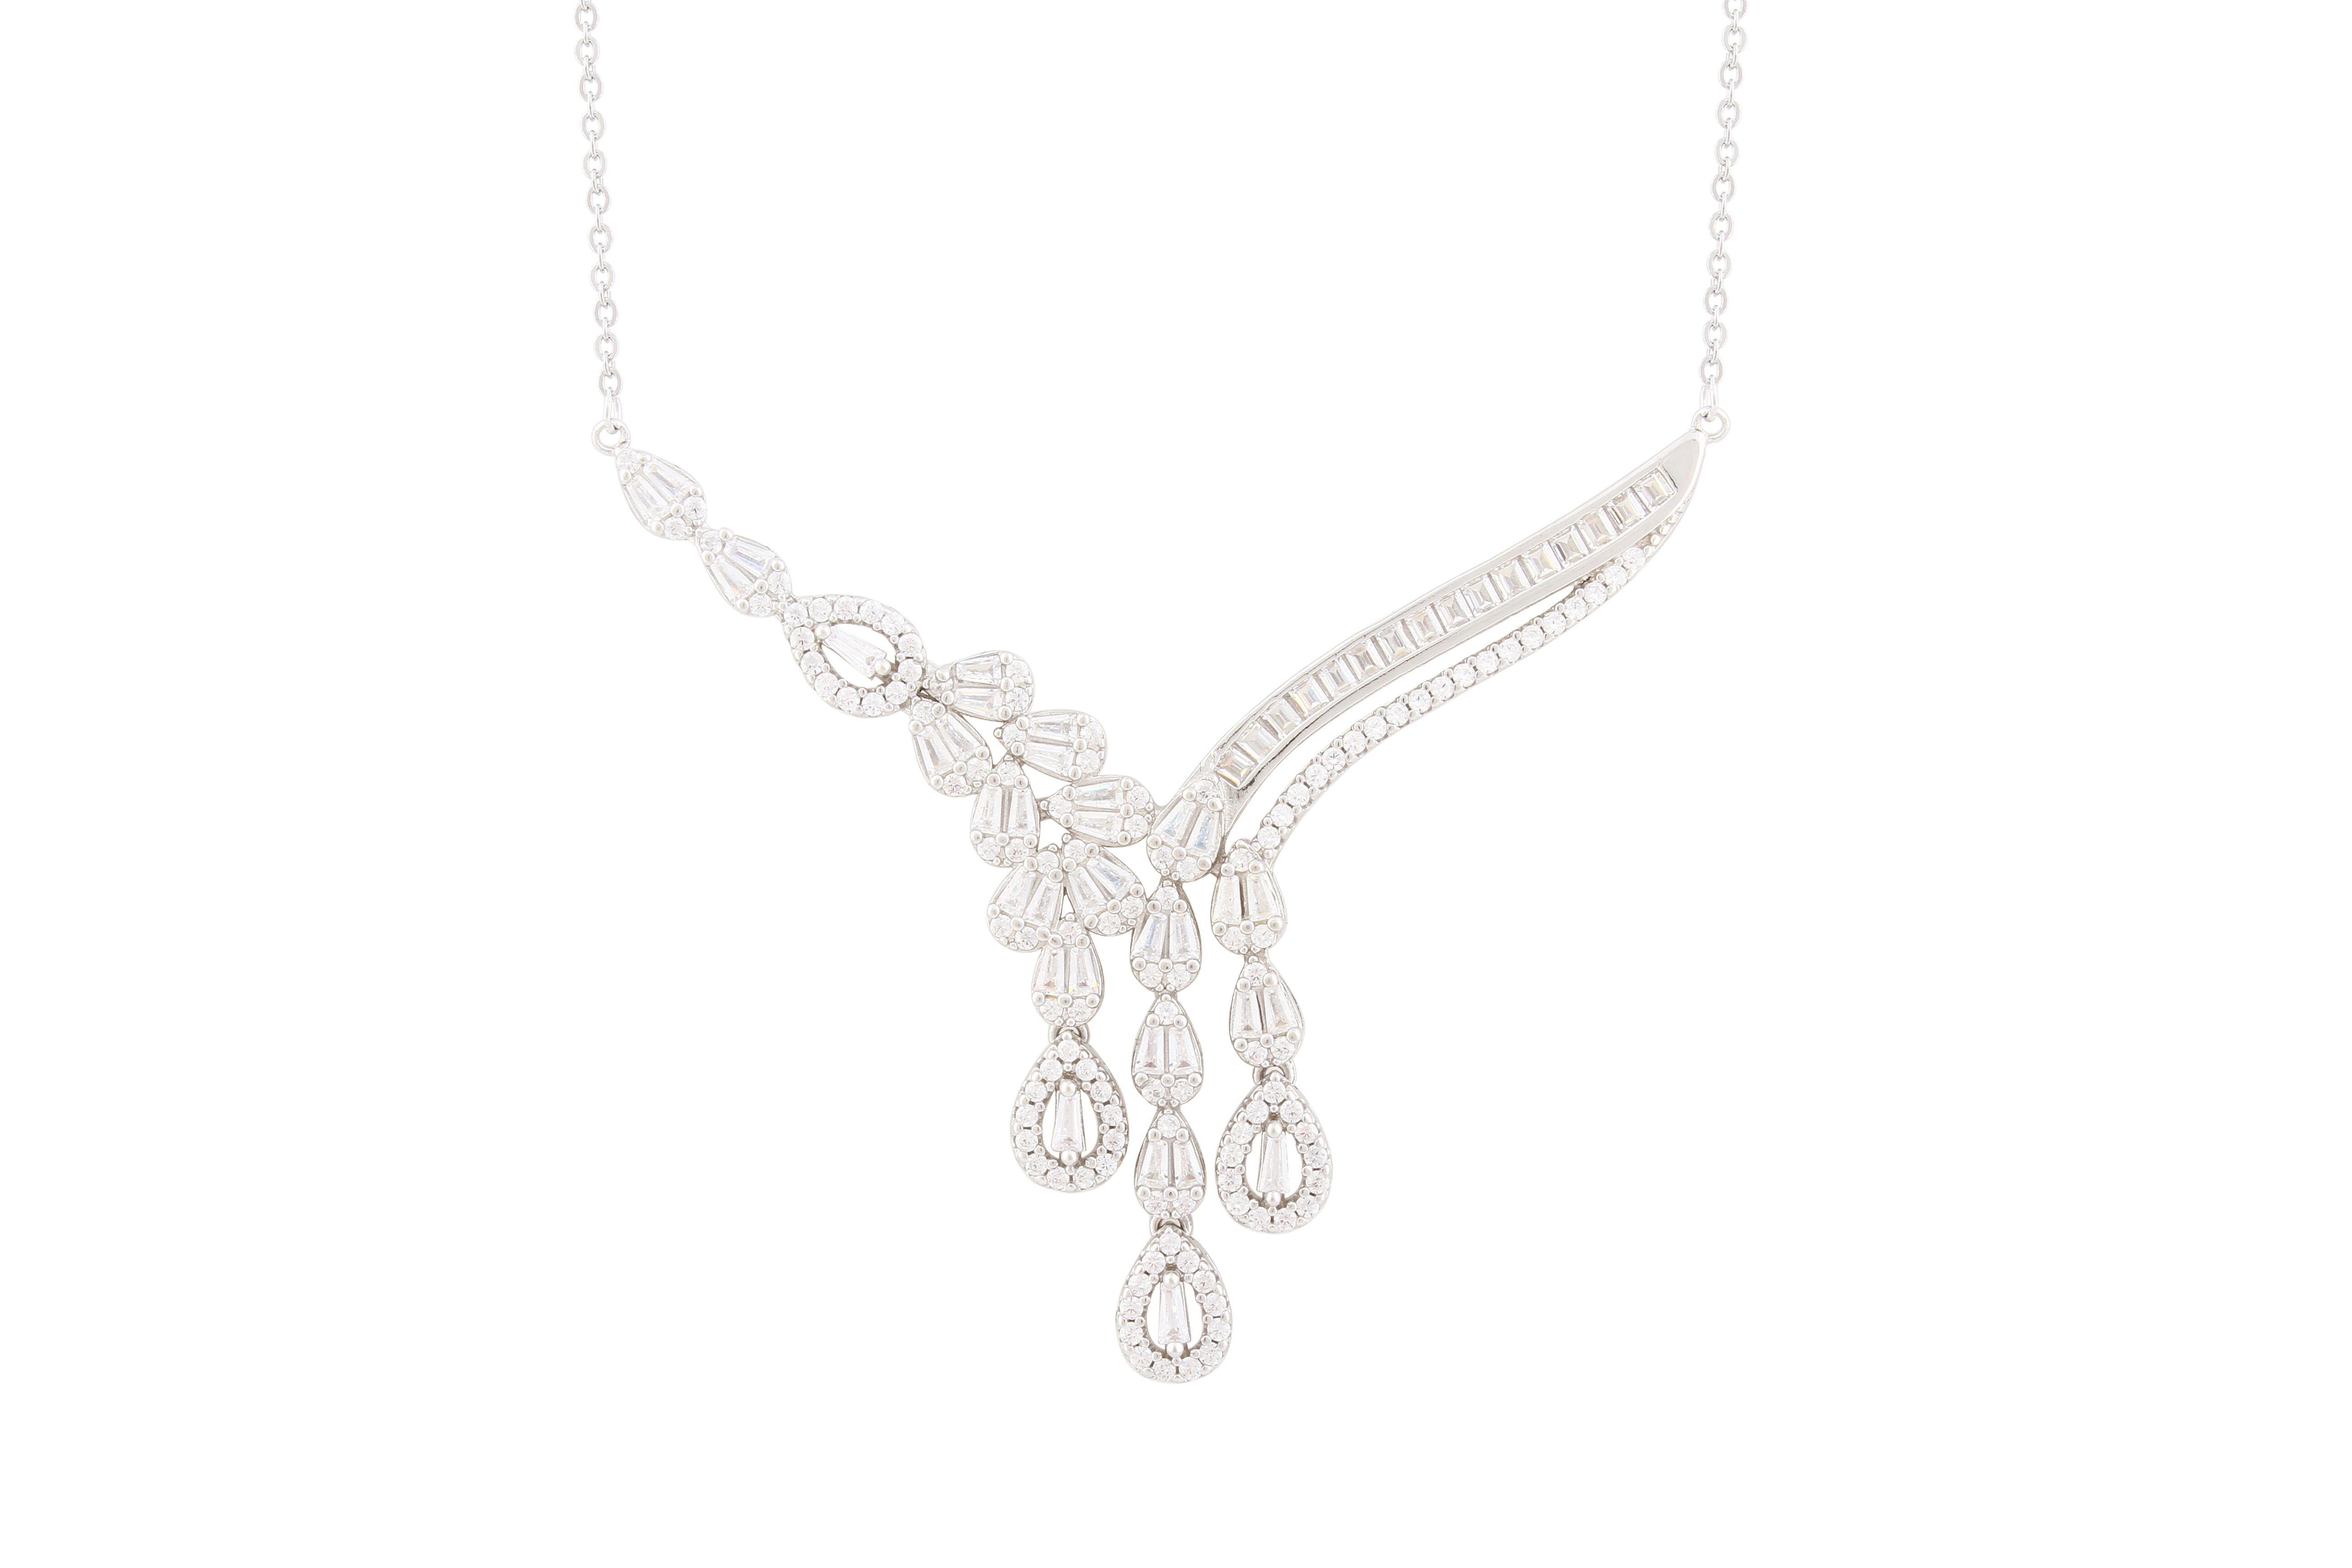 Asfour Chain Necklace With Art Deco Design